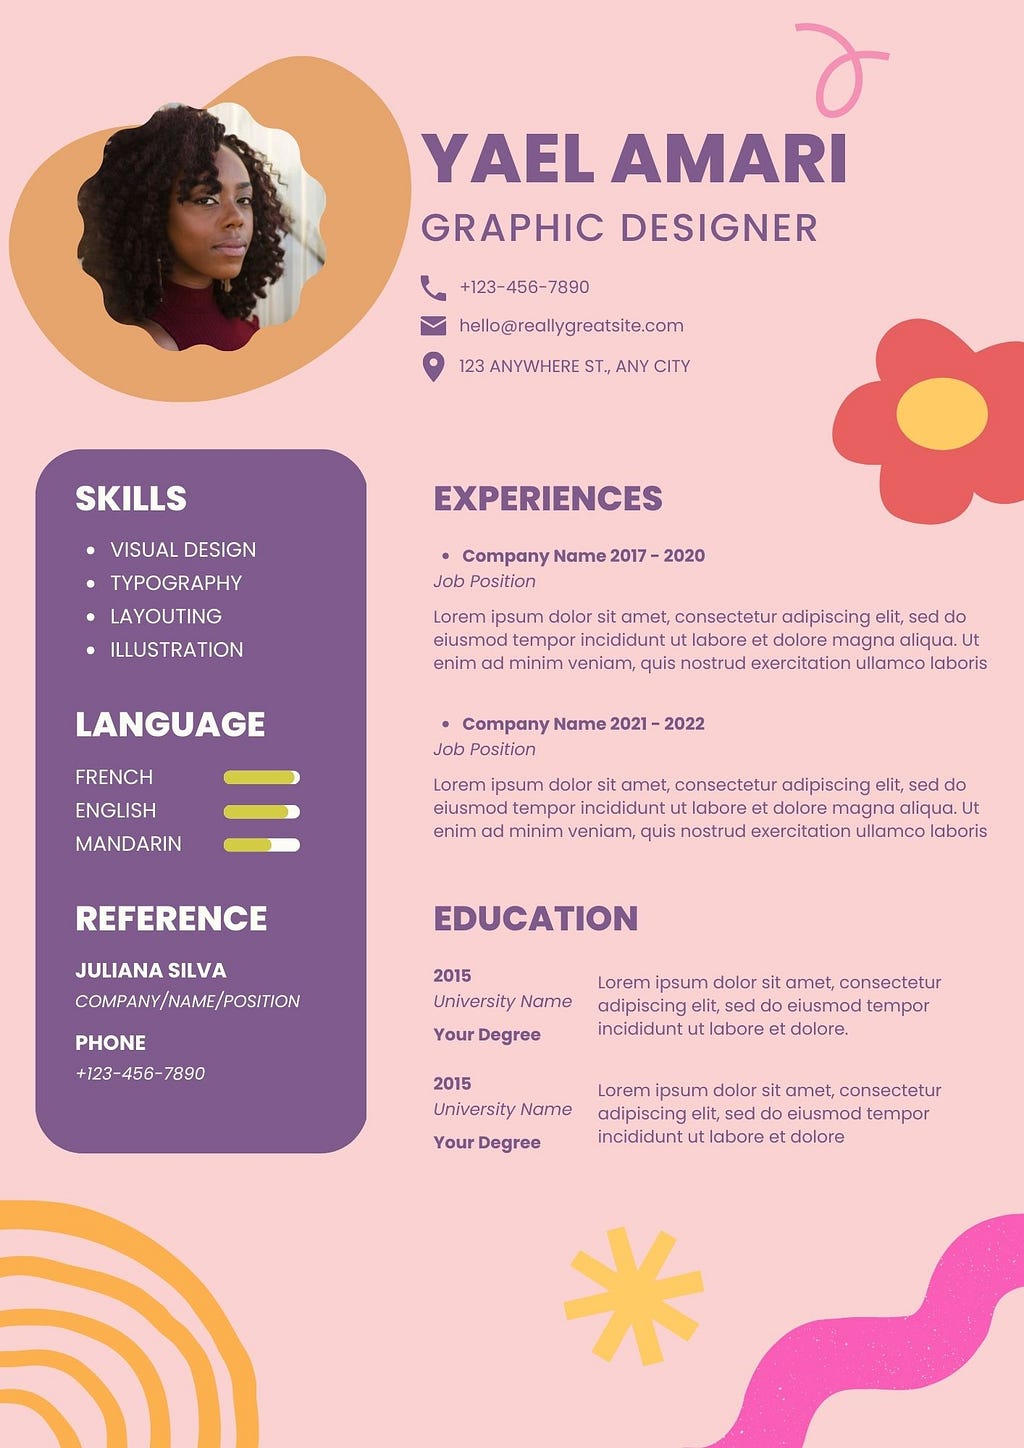 Alt Text: A CV template from Canva aimed at Graphic Designers; it has a pink background and lilac writing with lots of playful designs such as flowers and squiggles decorating the page. There is a space for a professional photo and the example features a woman with a closed mouth neutral expression and black curly hair. Her name in the example is “Yael Amari” and she is a Graphic Designer. The example copy is in ‘Lorem Ipsum’ latin.